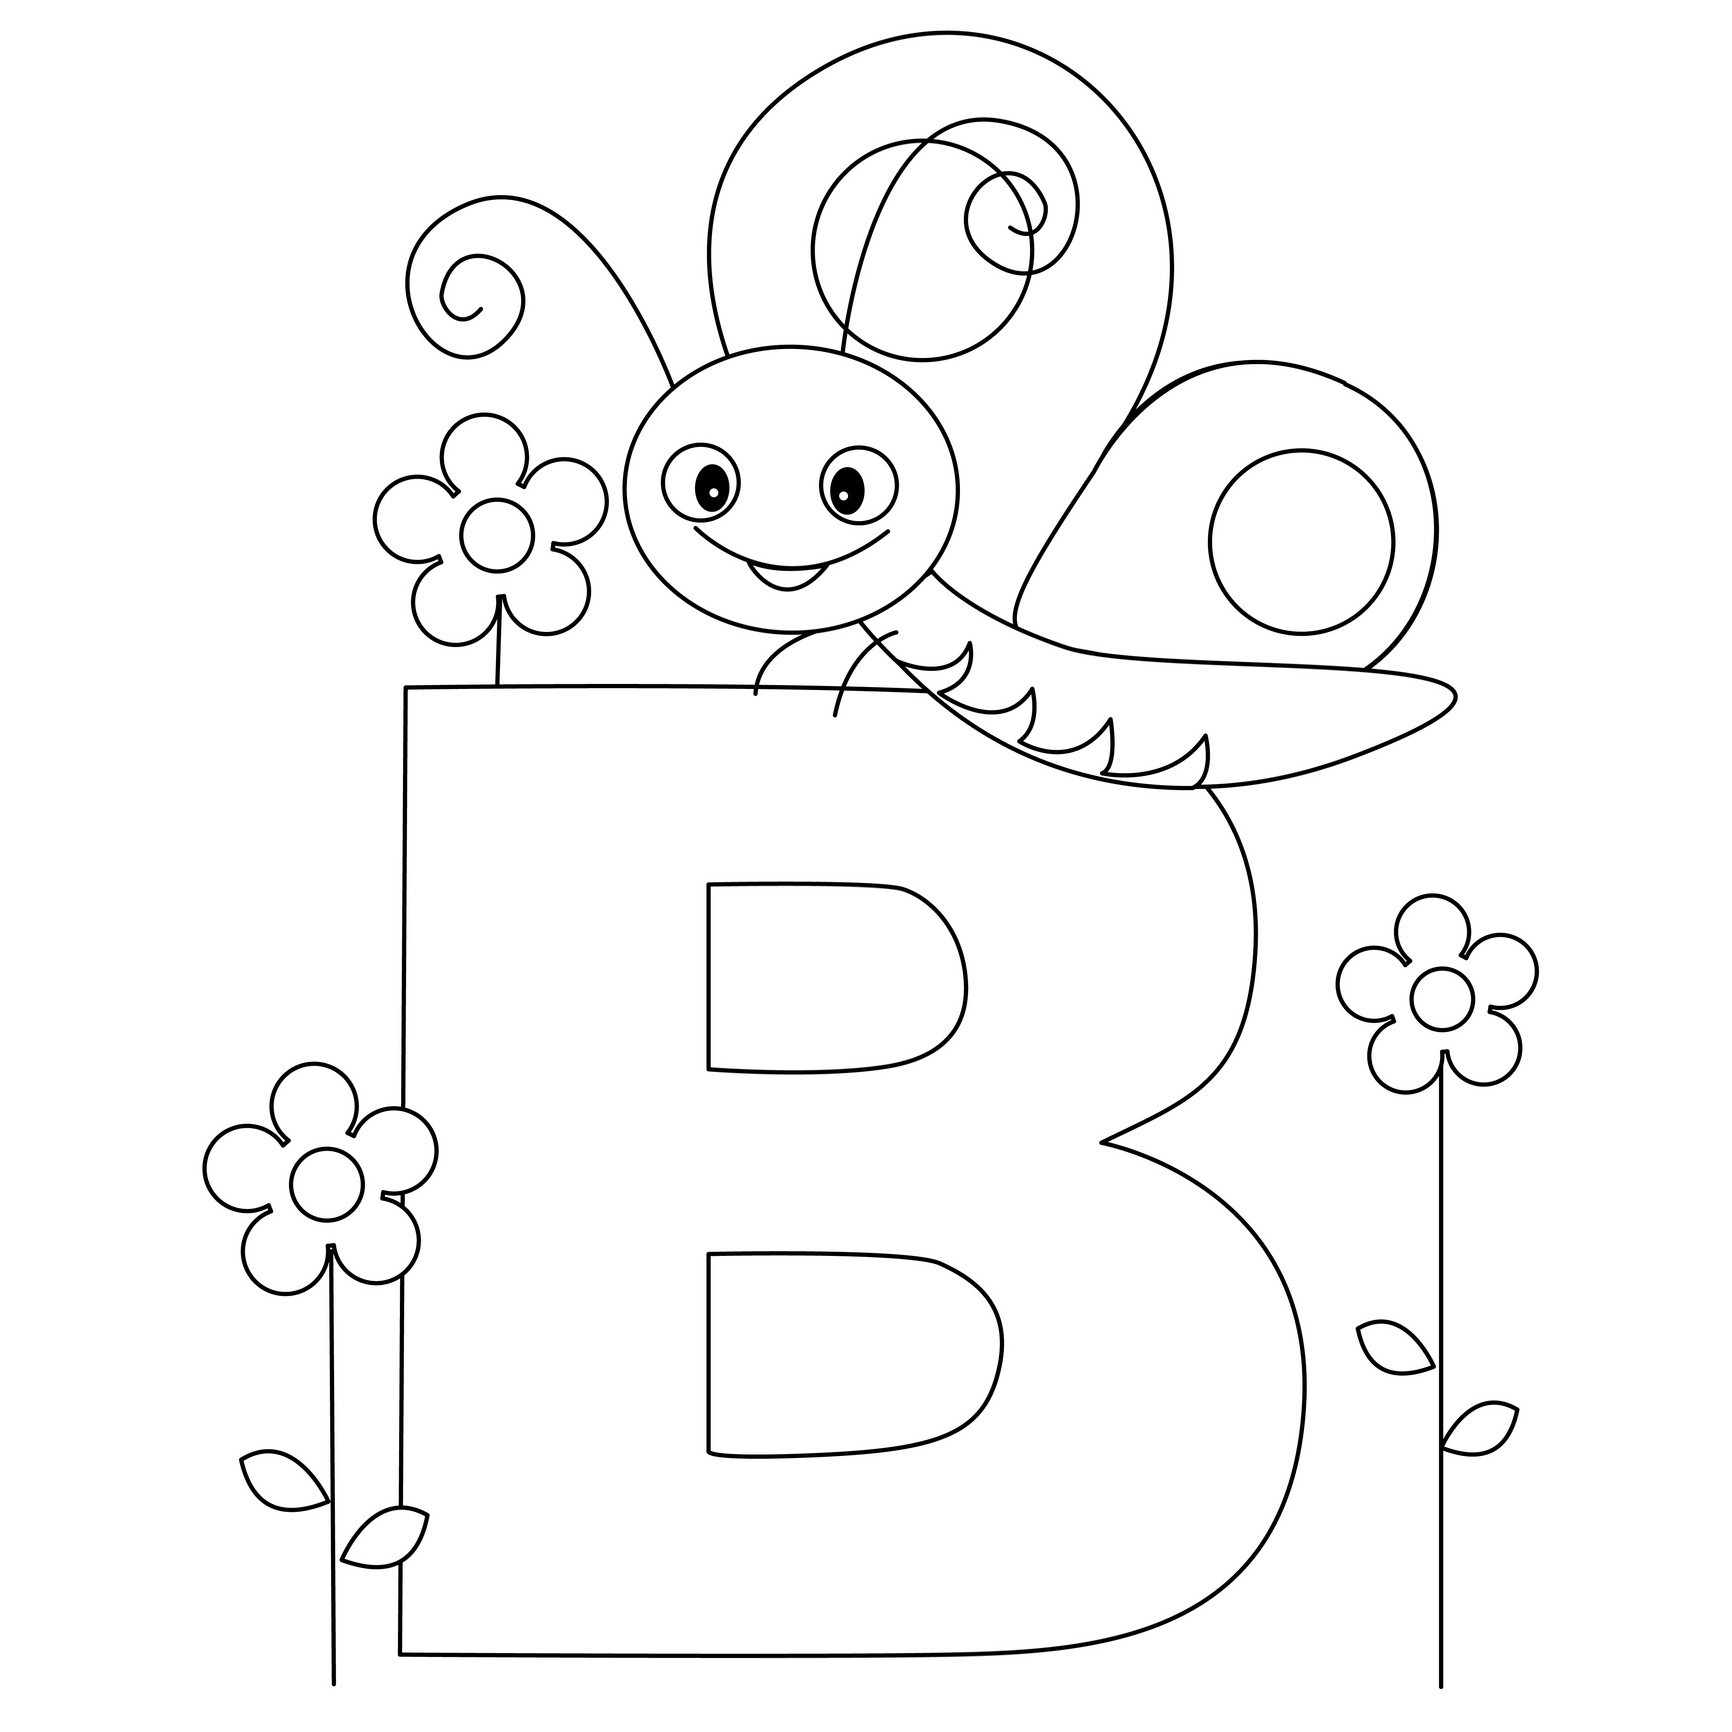 Coloring Pages : Free Printable Alphabet Coloring Pages For Kids - Free Printable Preschool Alphabet Coloring Pages